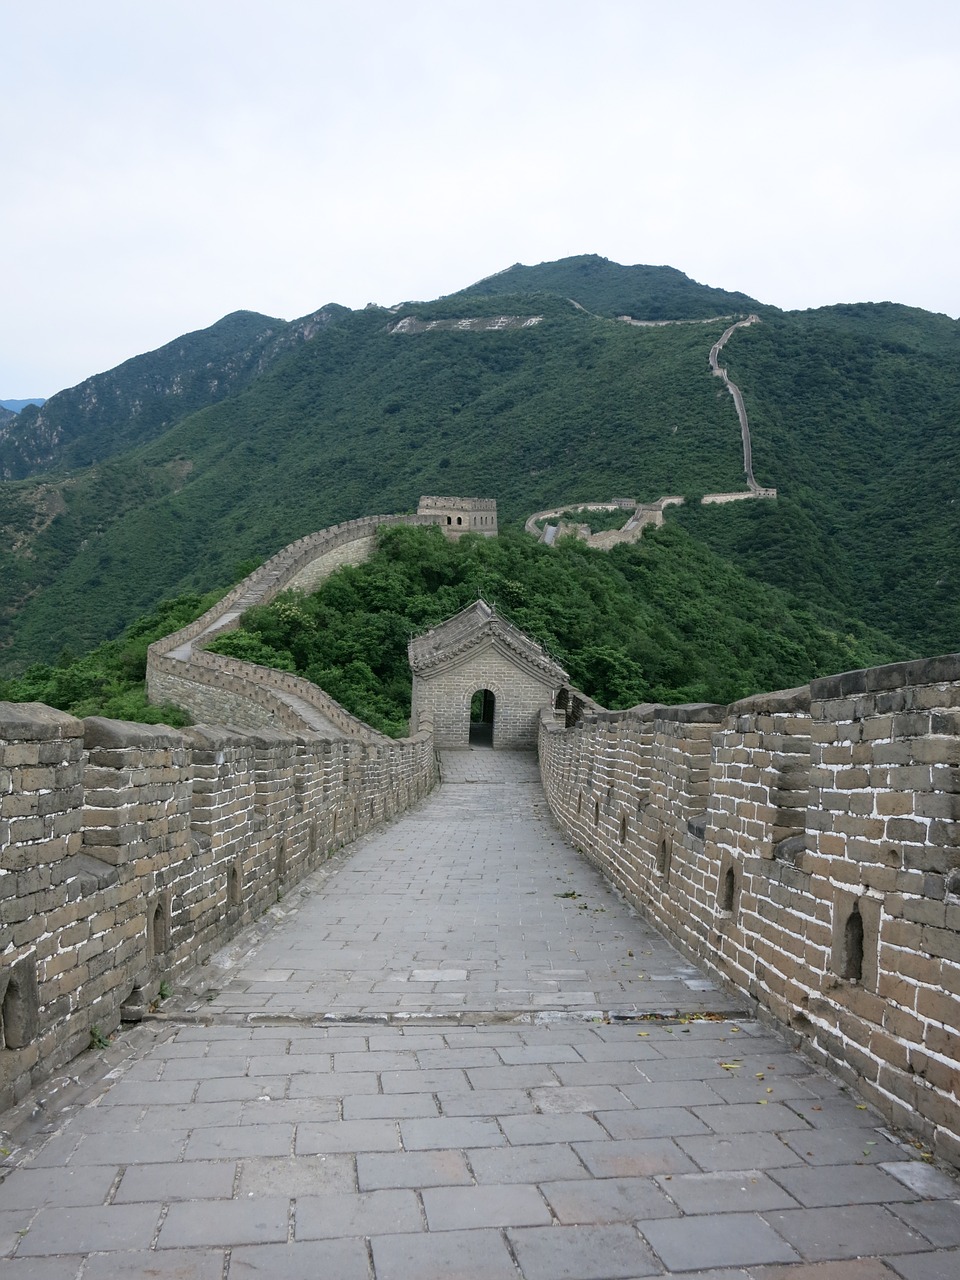 Great Wall of China - 6 Awesome Holiday Destinations to Add to Your Bucket List